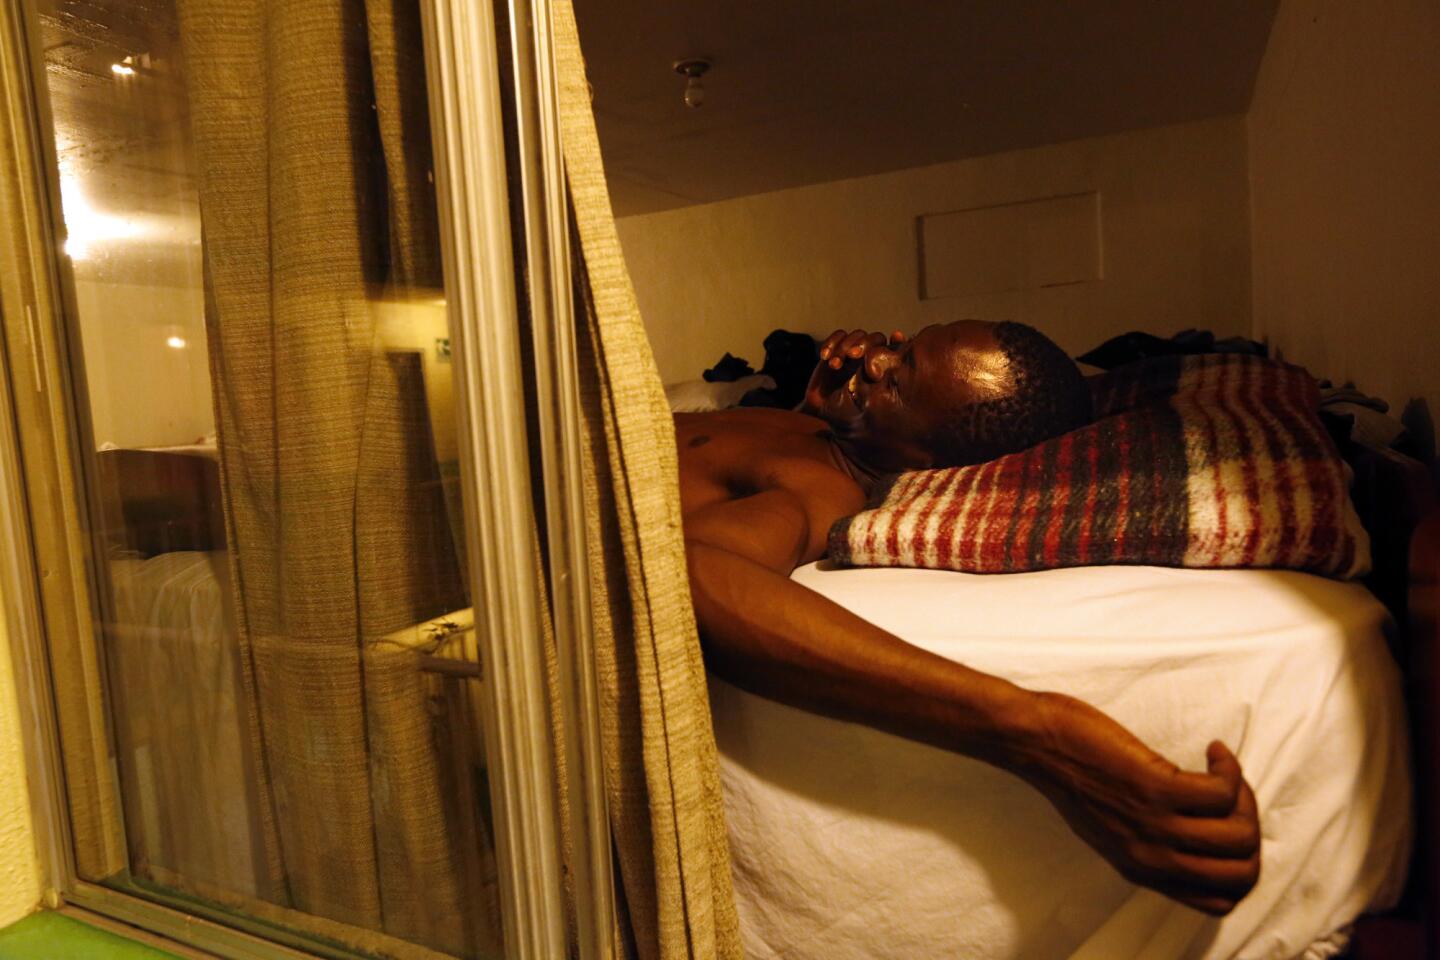 A Haitian migrant makes a call before going to sleep at the Casa del Migrante shelter in Tijuana, Mexica.